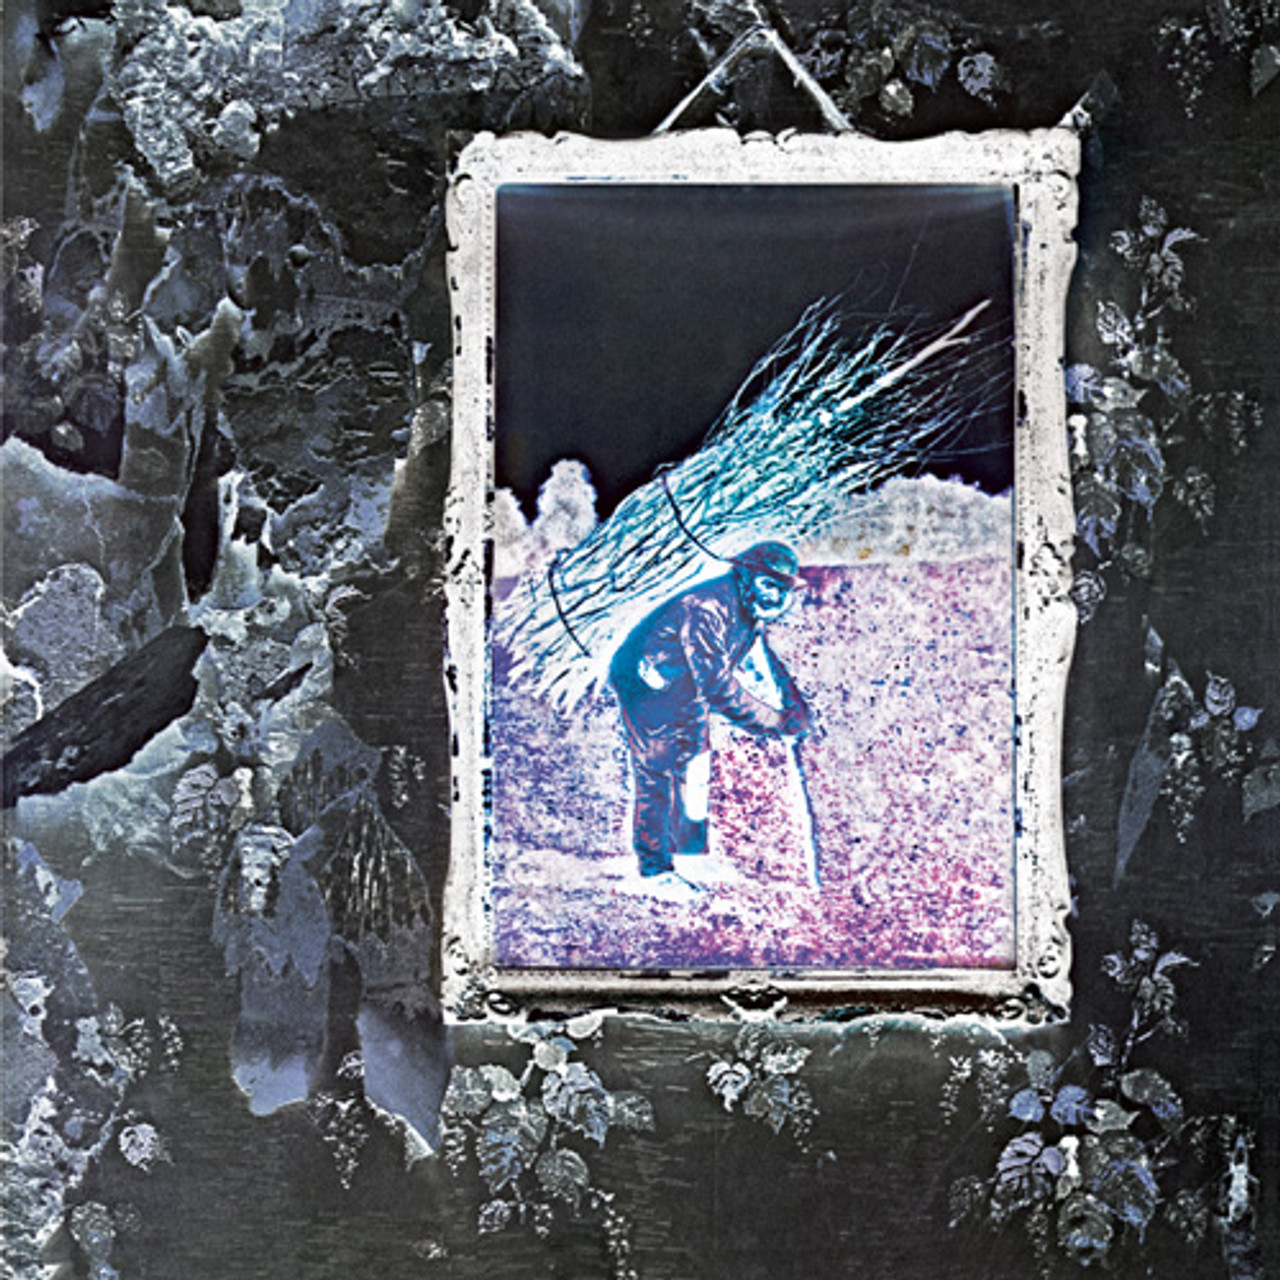 Led Zeppelin IV SUPER DELUXE EDITION BOX